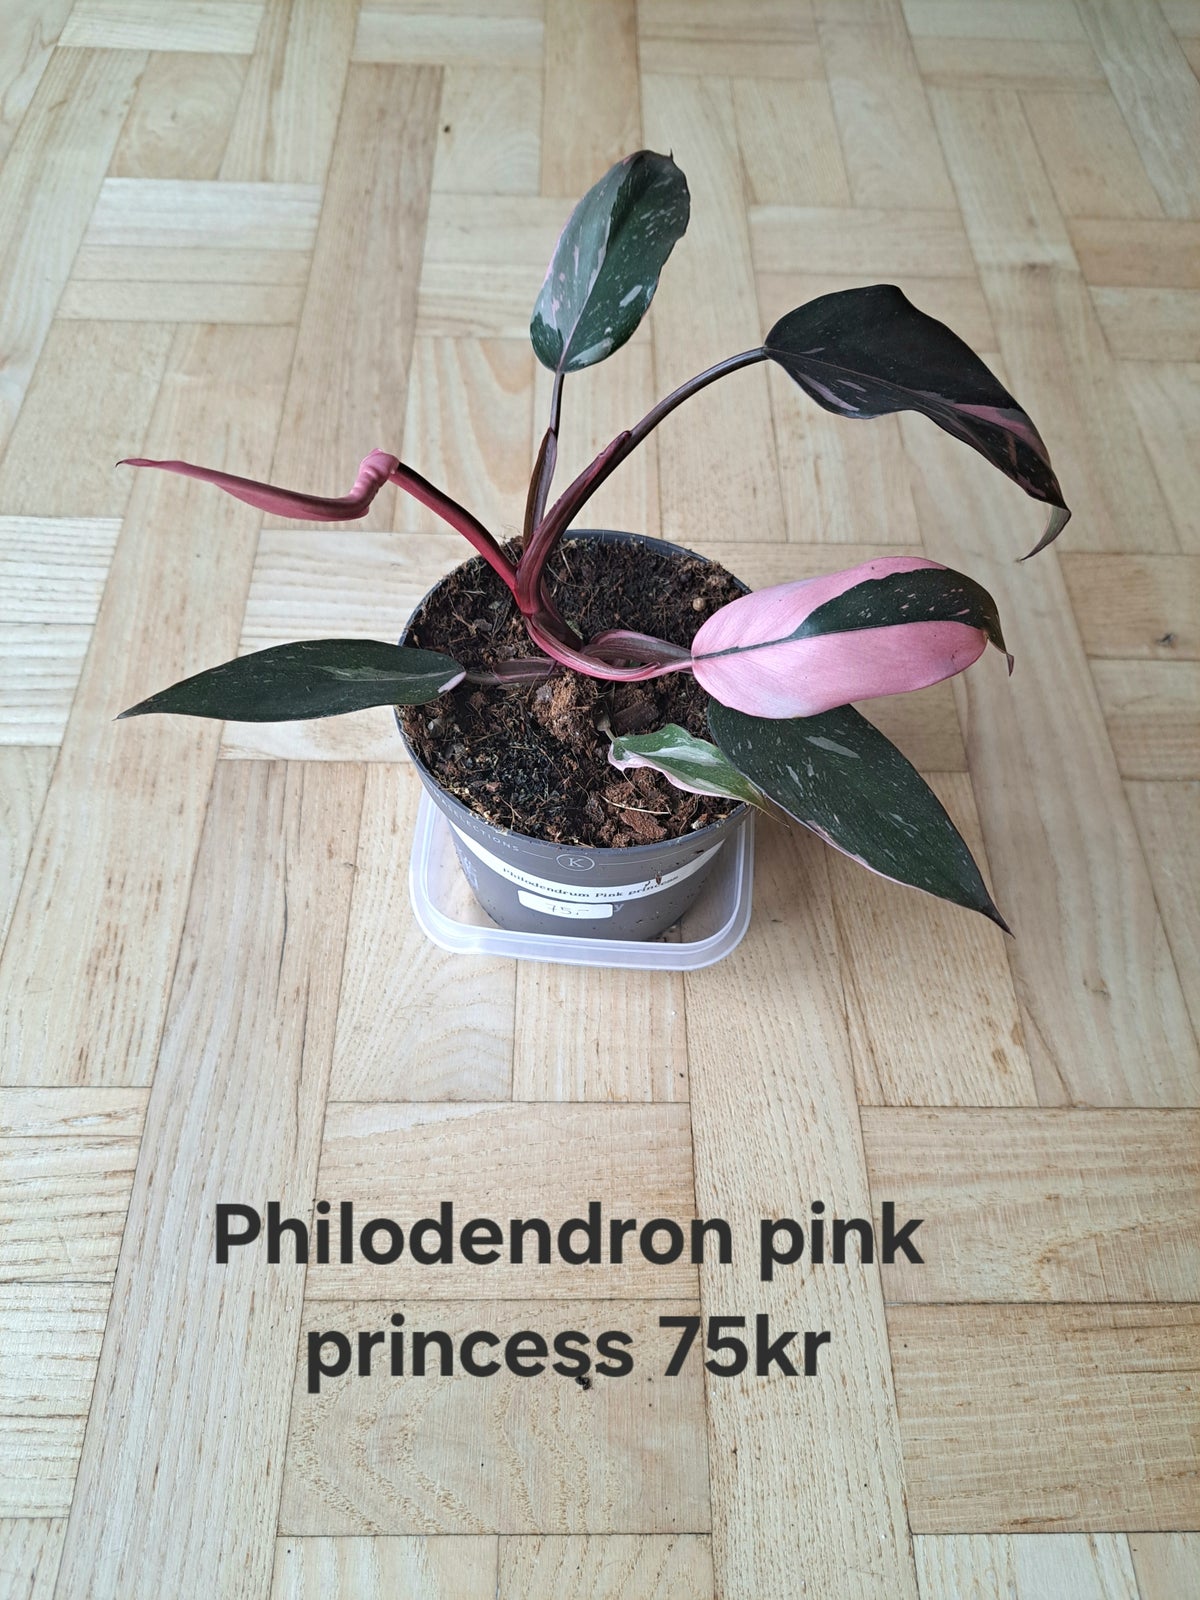 Philodendron, Pink princess